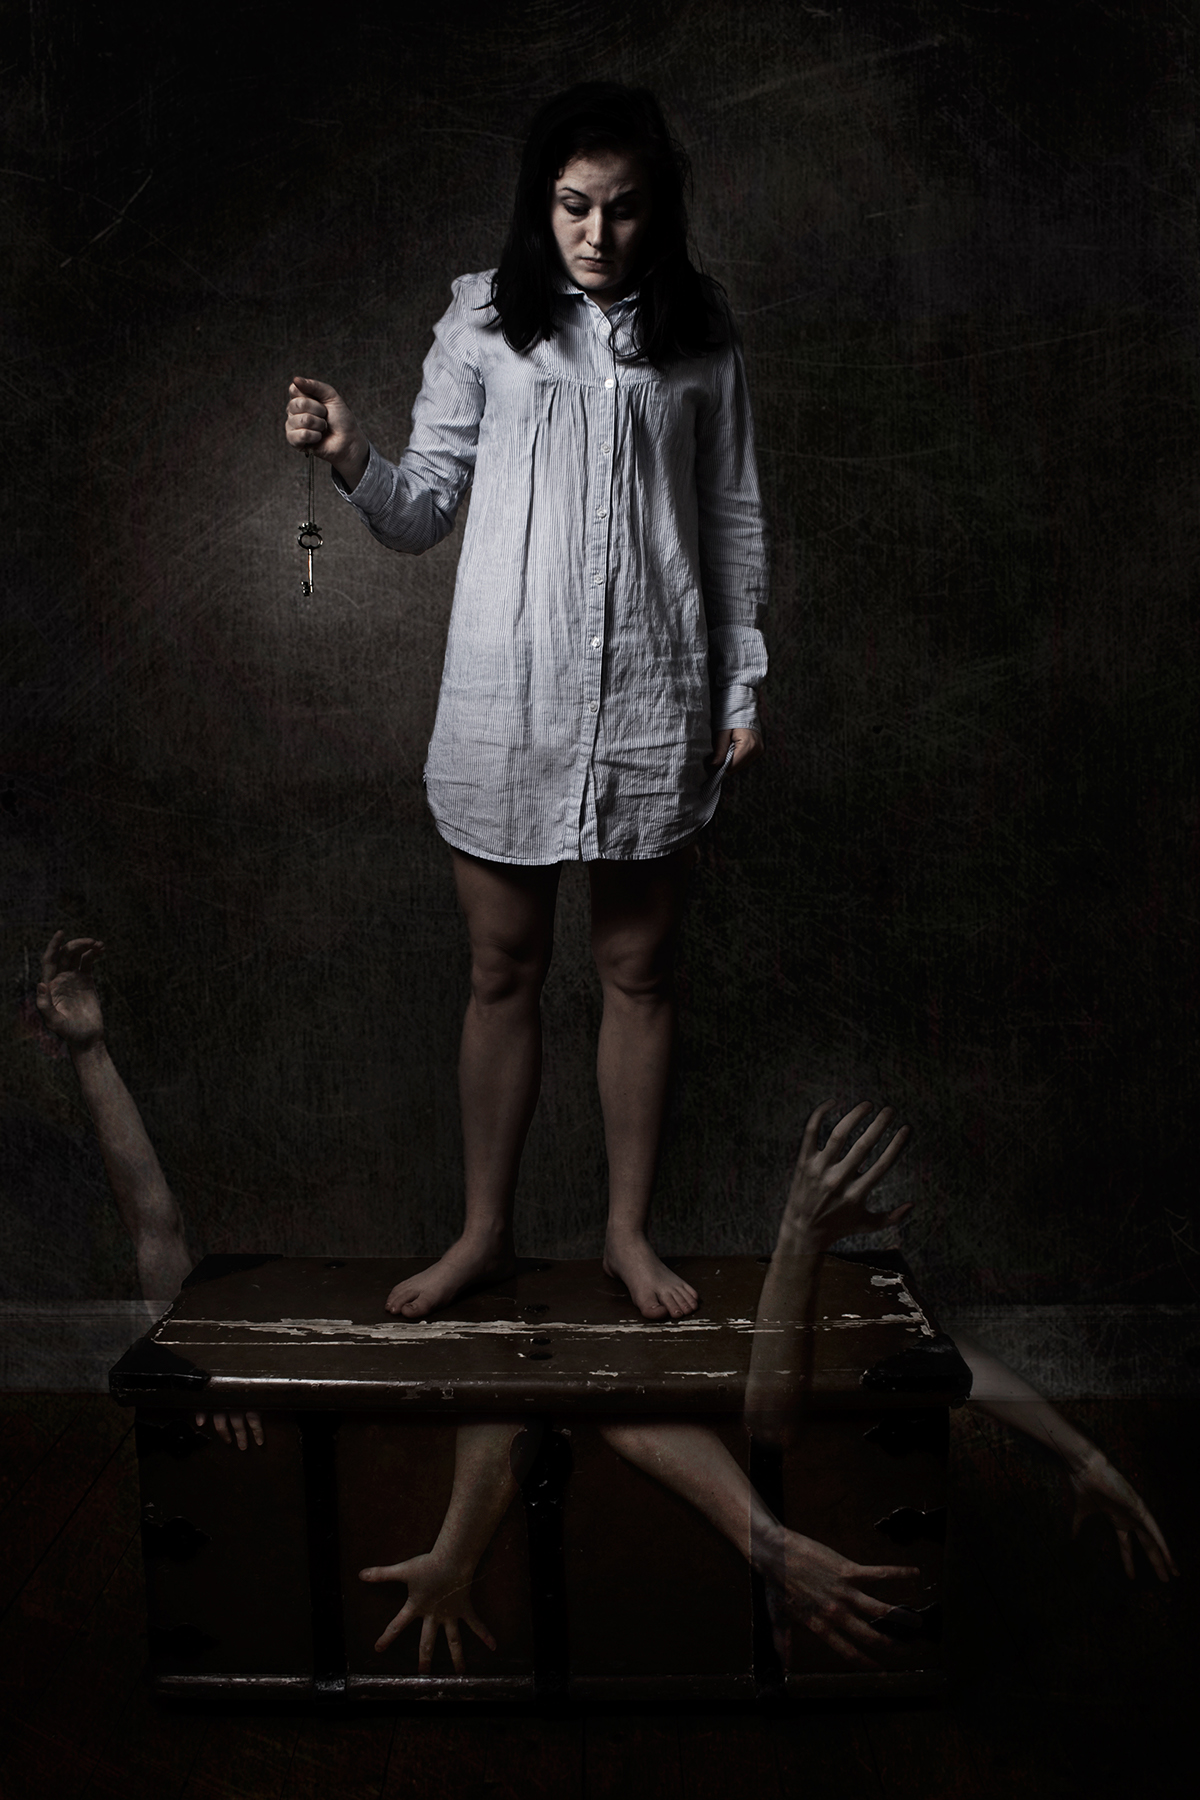 surreal photo selfportrait fantasy photoshop hands ghost dream Scary scared girl afraid